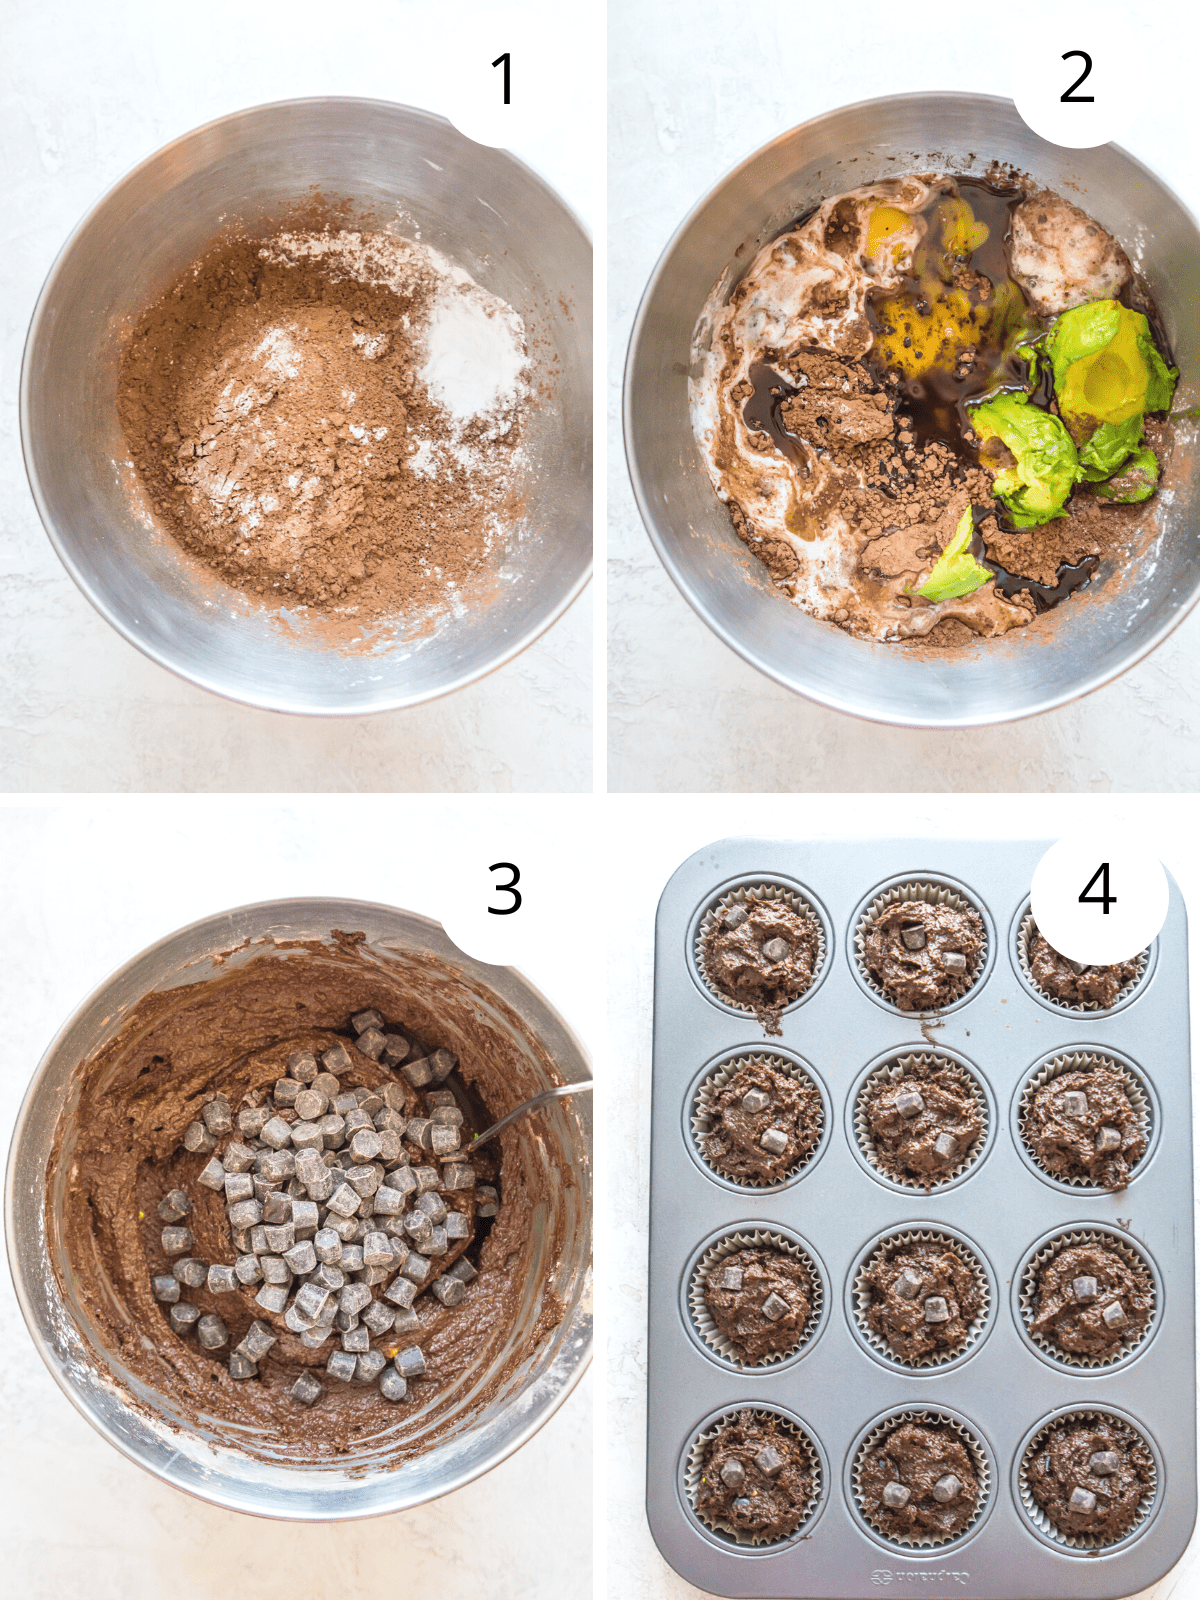 Step by step directions for making chocolate avocado muffins.